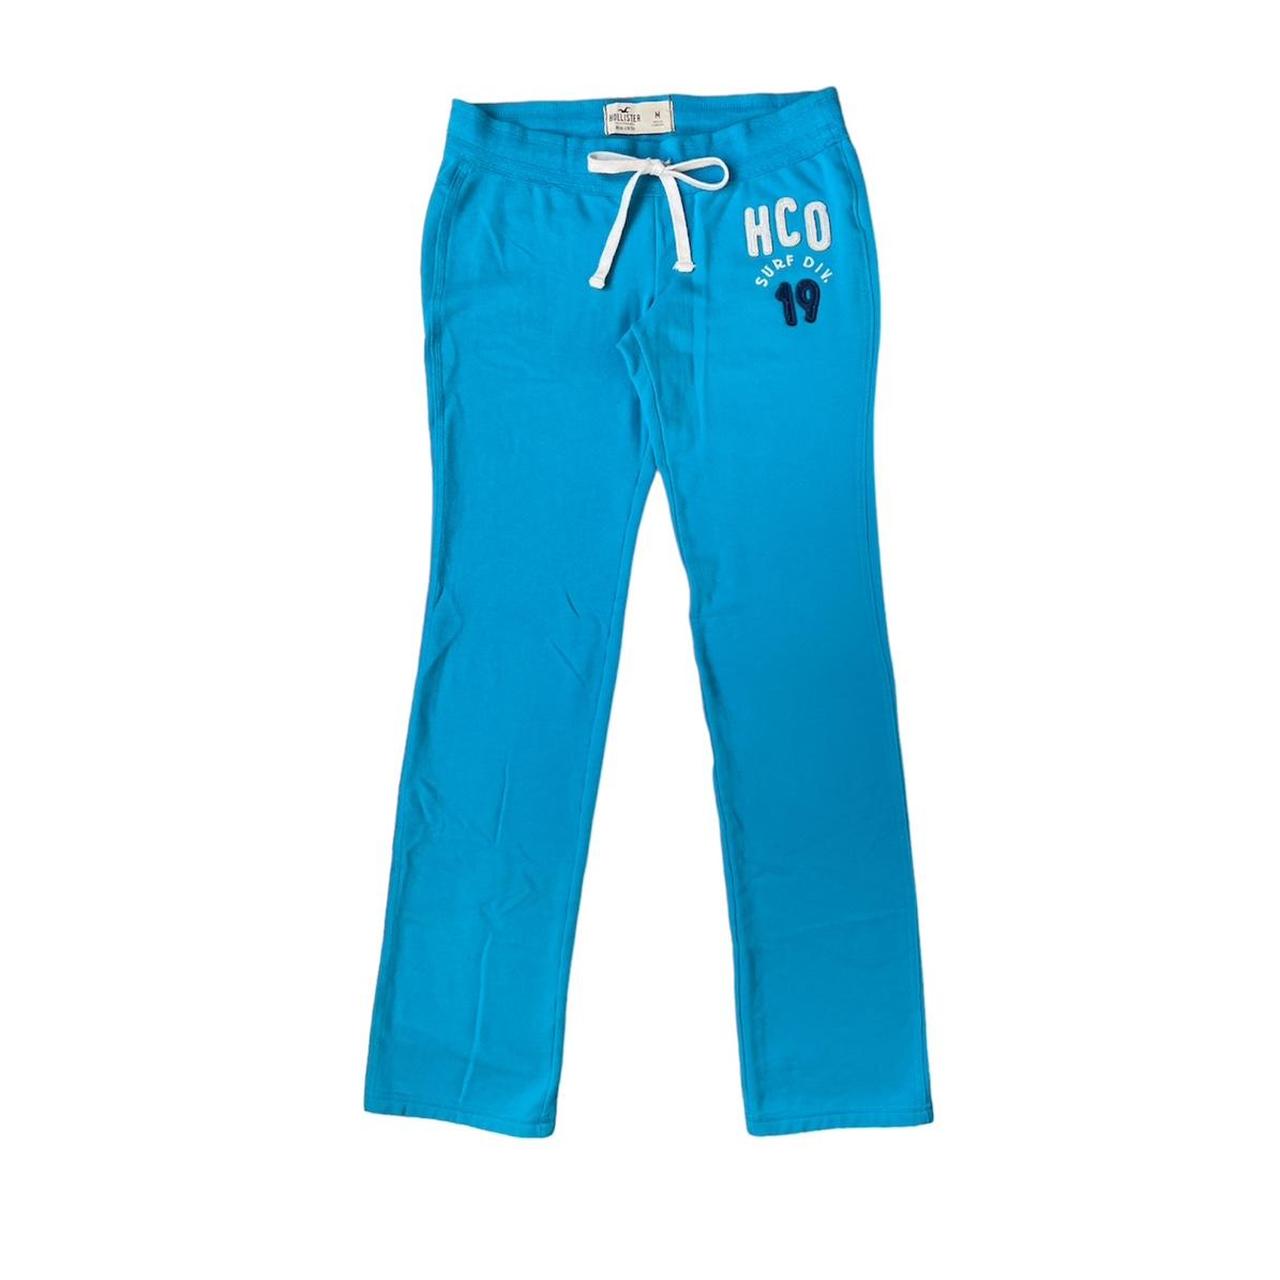 What To Wear With Blue Hollister Sweatpants? – solowomen